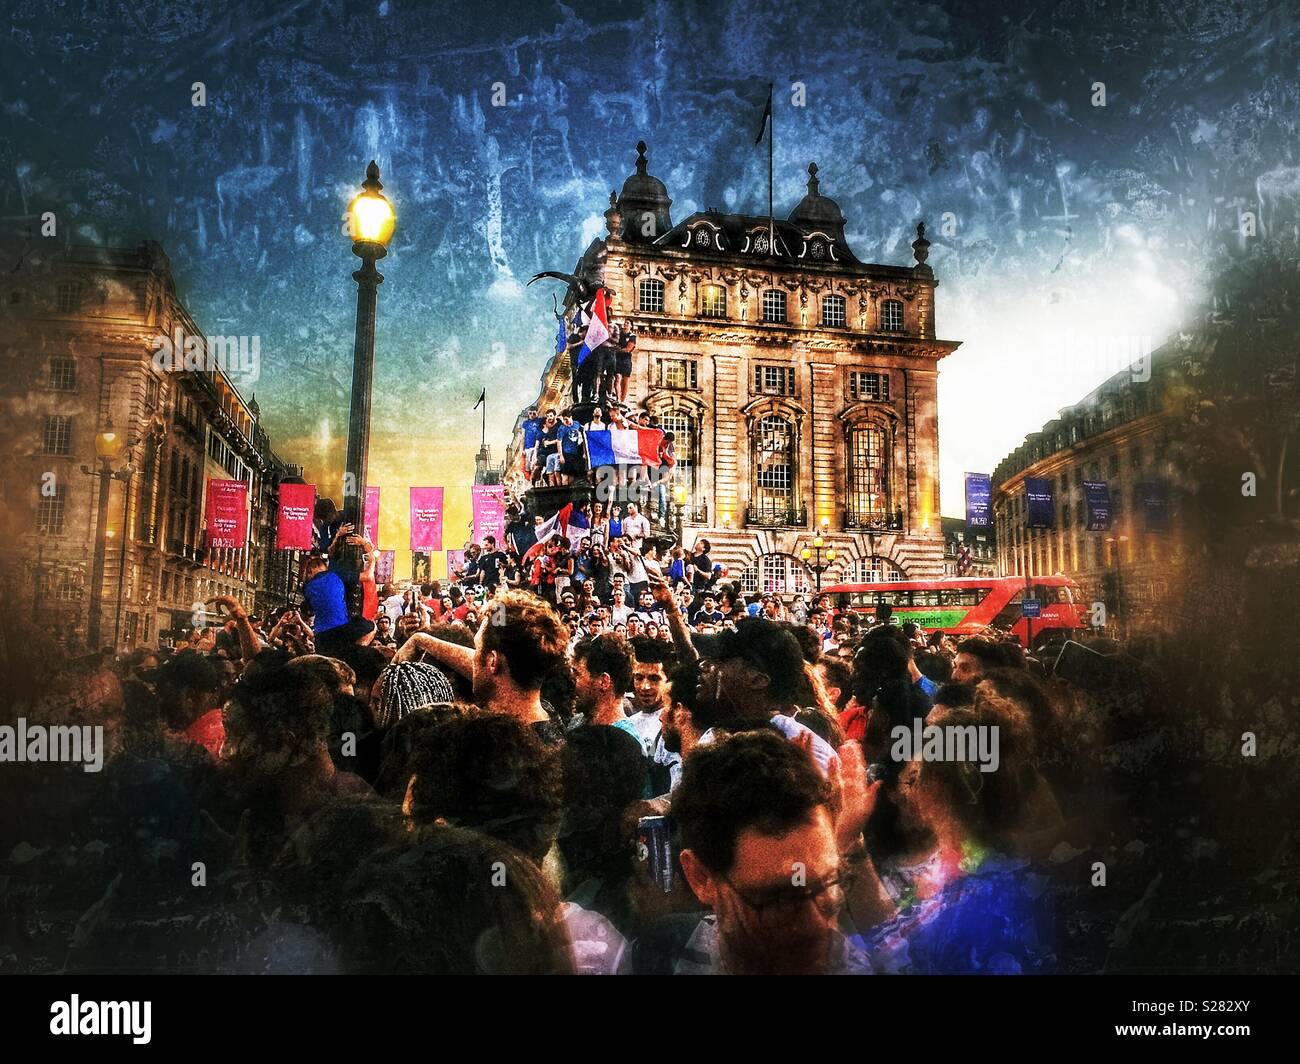 French fans celebrating France’s 2018 World Cup win, Eros statue, Piccadilly Circus, London Stock Photo